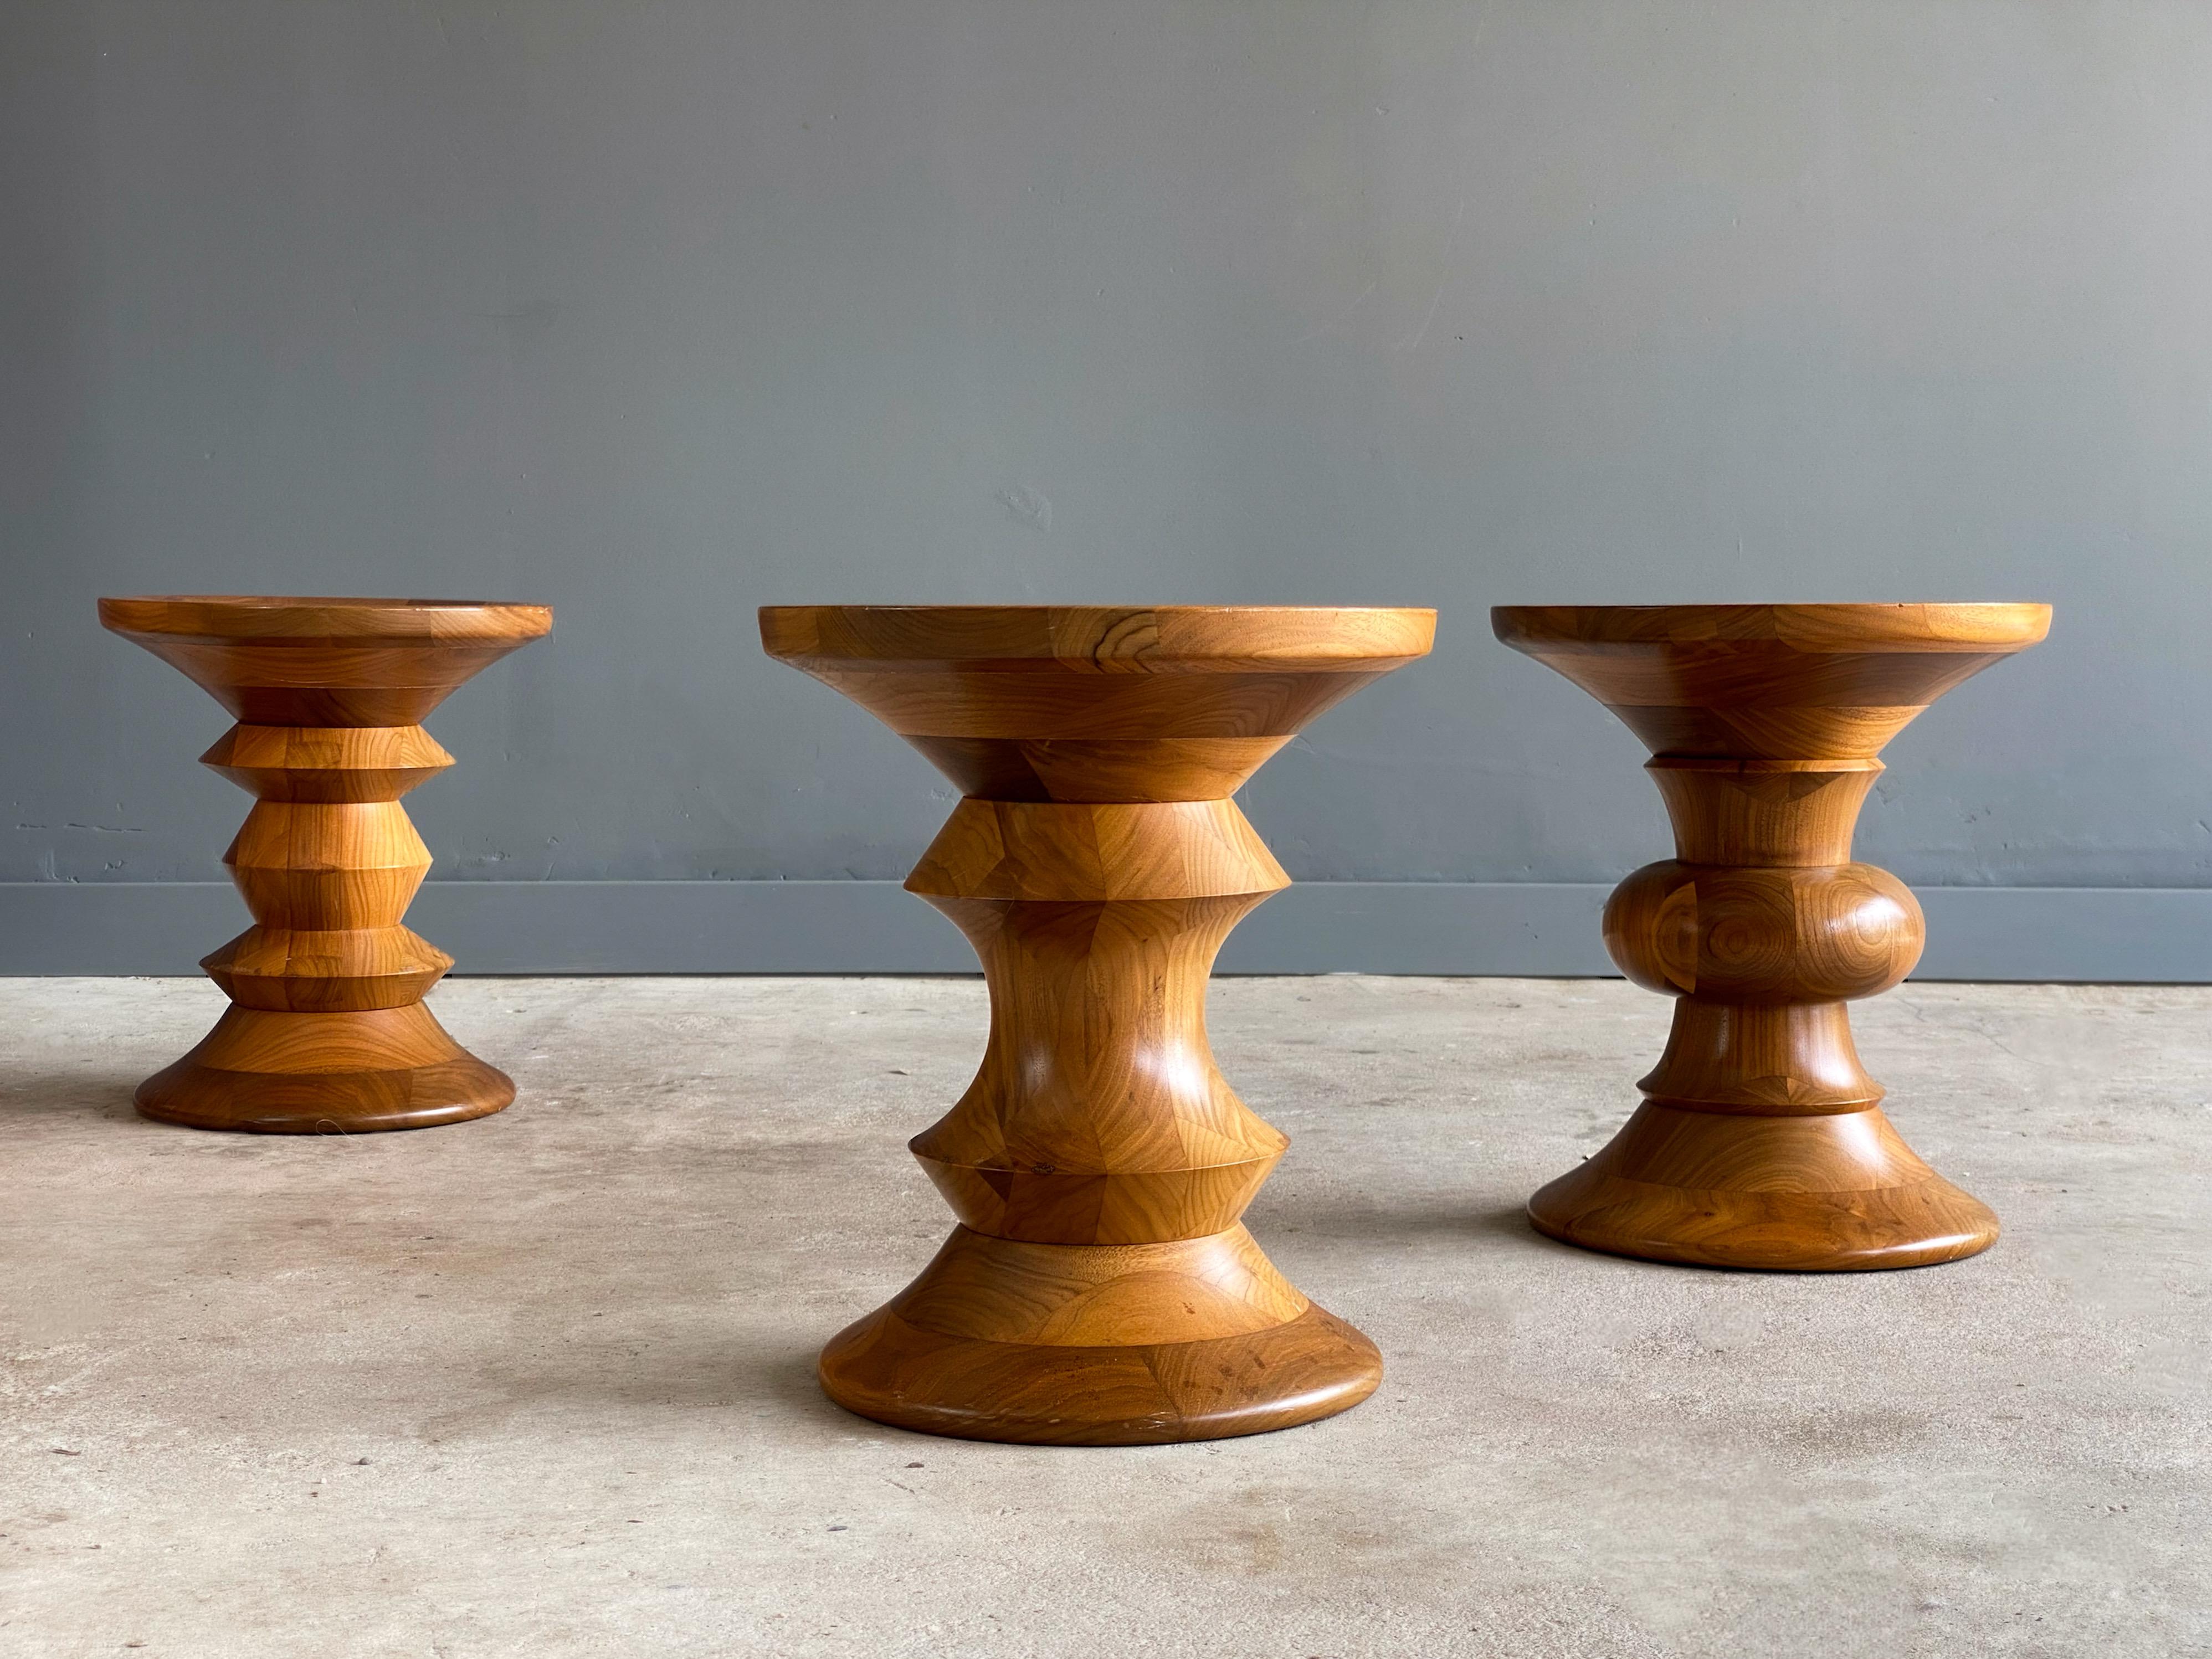 Iconic and complete set of walnut Time Life stools designed by Ray Eames for Herman Miller. These examples, models A, B and C have been with one another since they left the factory. Originally purchased and owned by a Herman Miller employee since